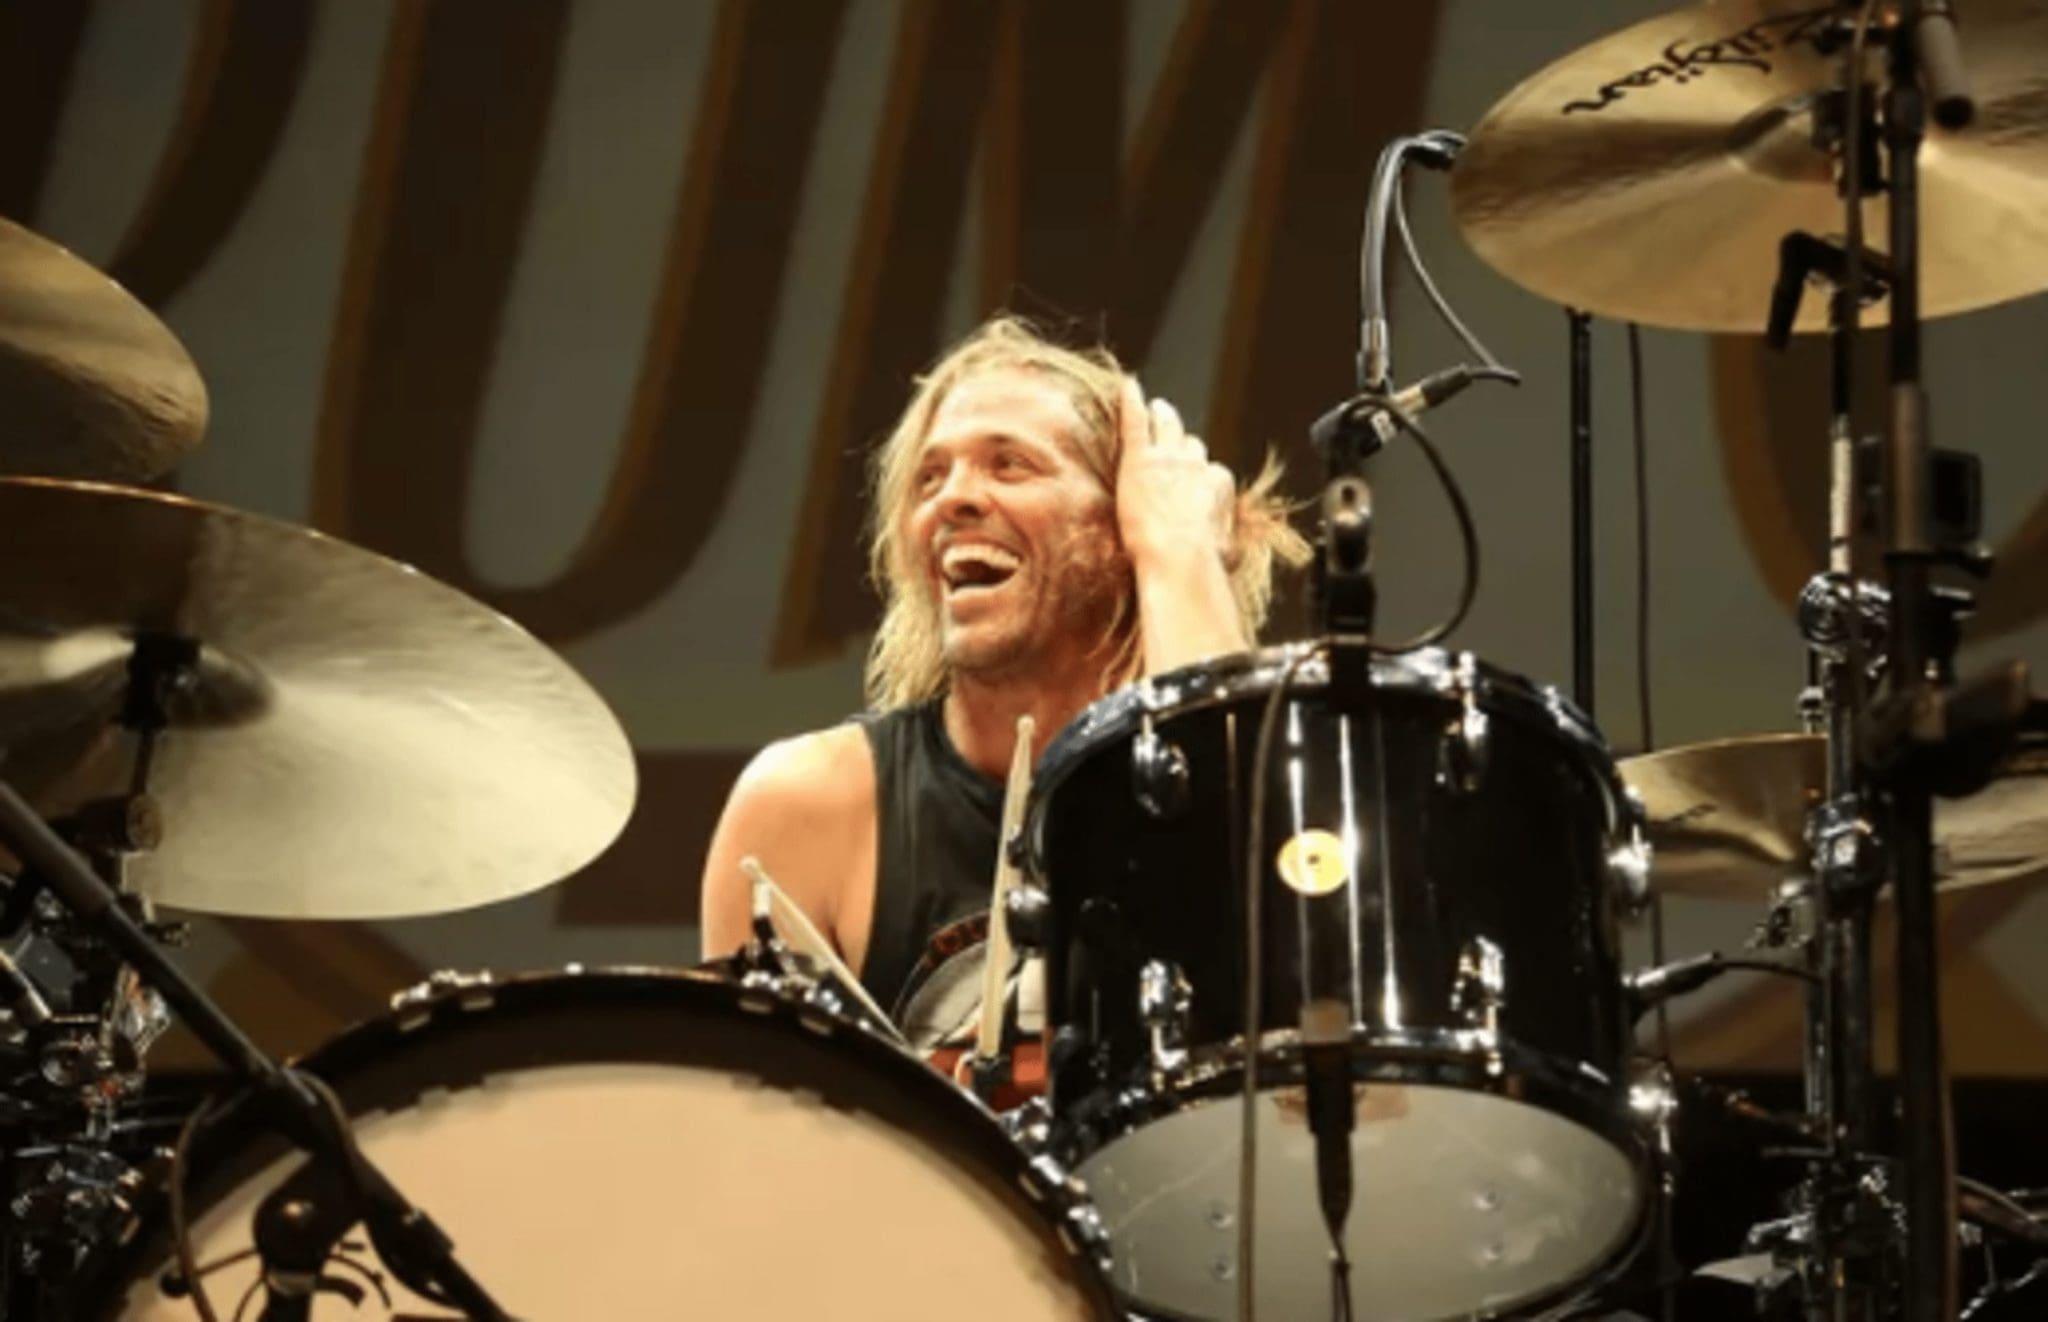 Oliver Shane Hawkins, A Son Of Taylor Hawkins, Performs On The Drums At A Performance In Honour Of His Father